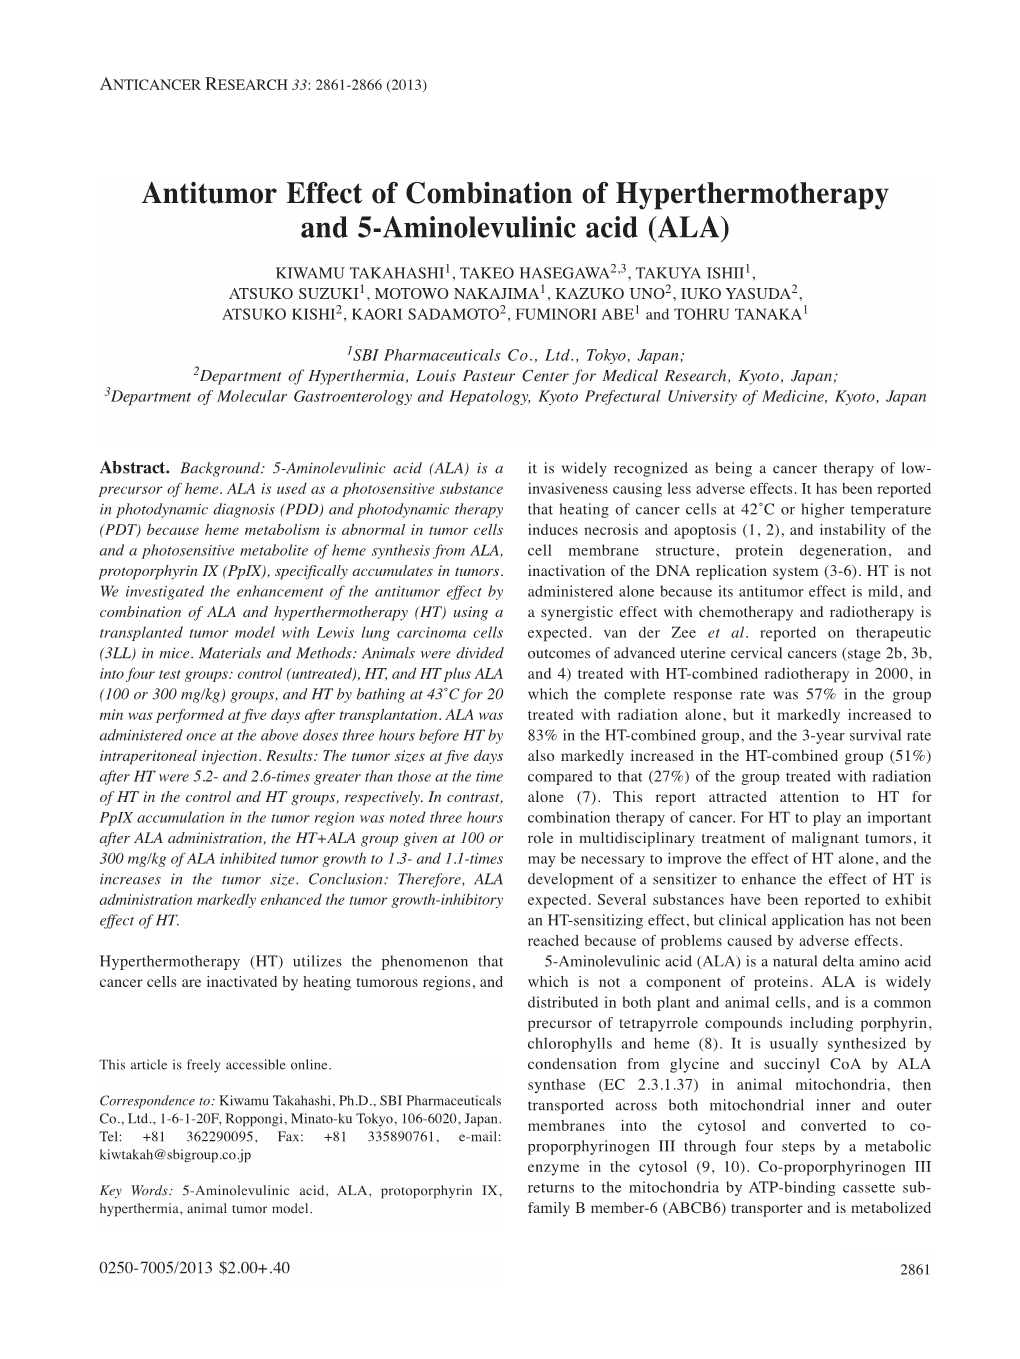 Antitumor Effect of Combination of Hyperthermotherapy and 5-Aminolevulinic Acid (ALA)